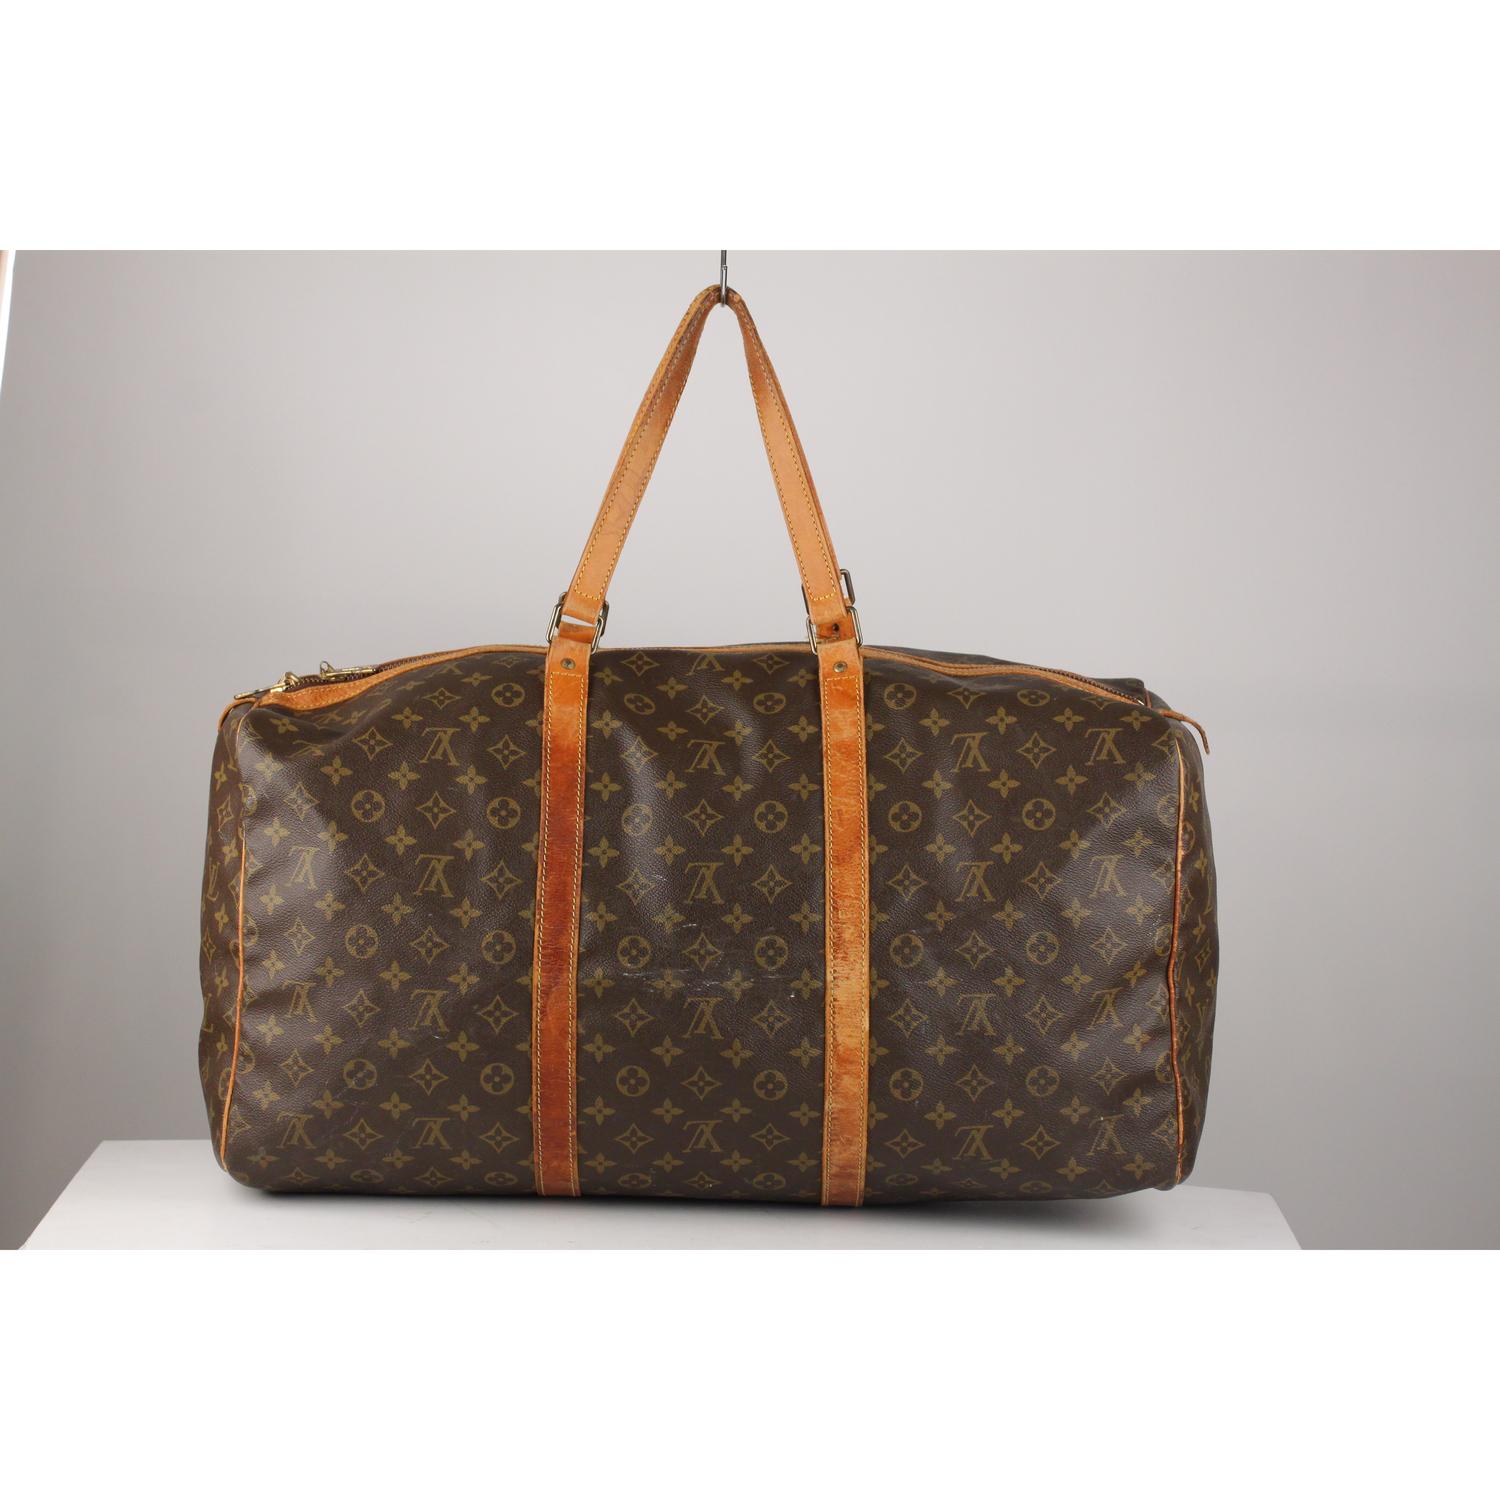 Louis Vuitton classic Monogram Canvas vintage 'Sac Souple 55'. Double zip closure. Double leather handles. Brown fabric lining. 'Louis Vuitton Paris - made in France' engraved on leather piece on the side (with serial number engraved on its reverse,